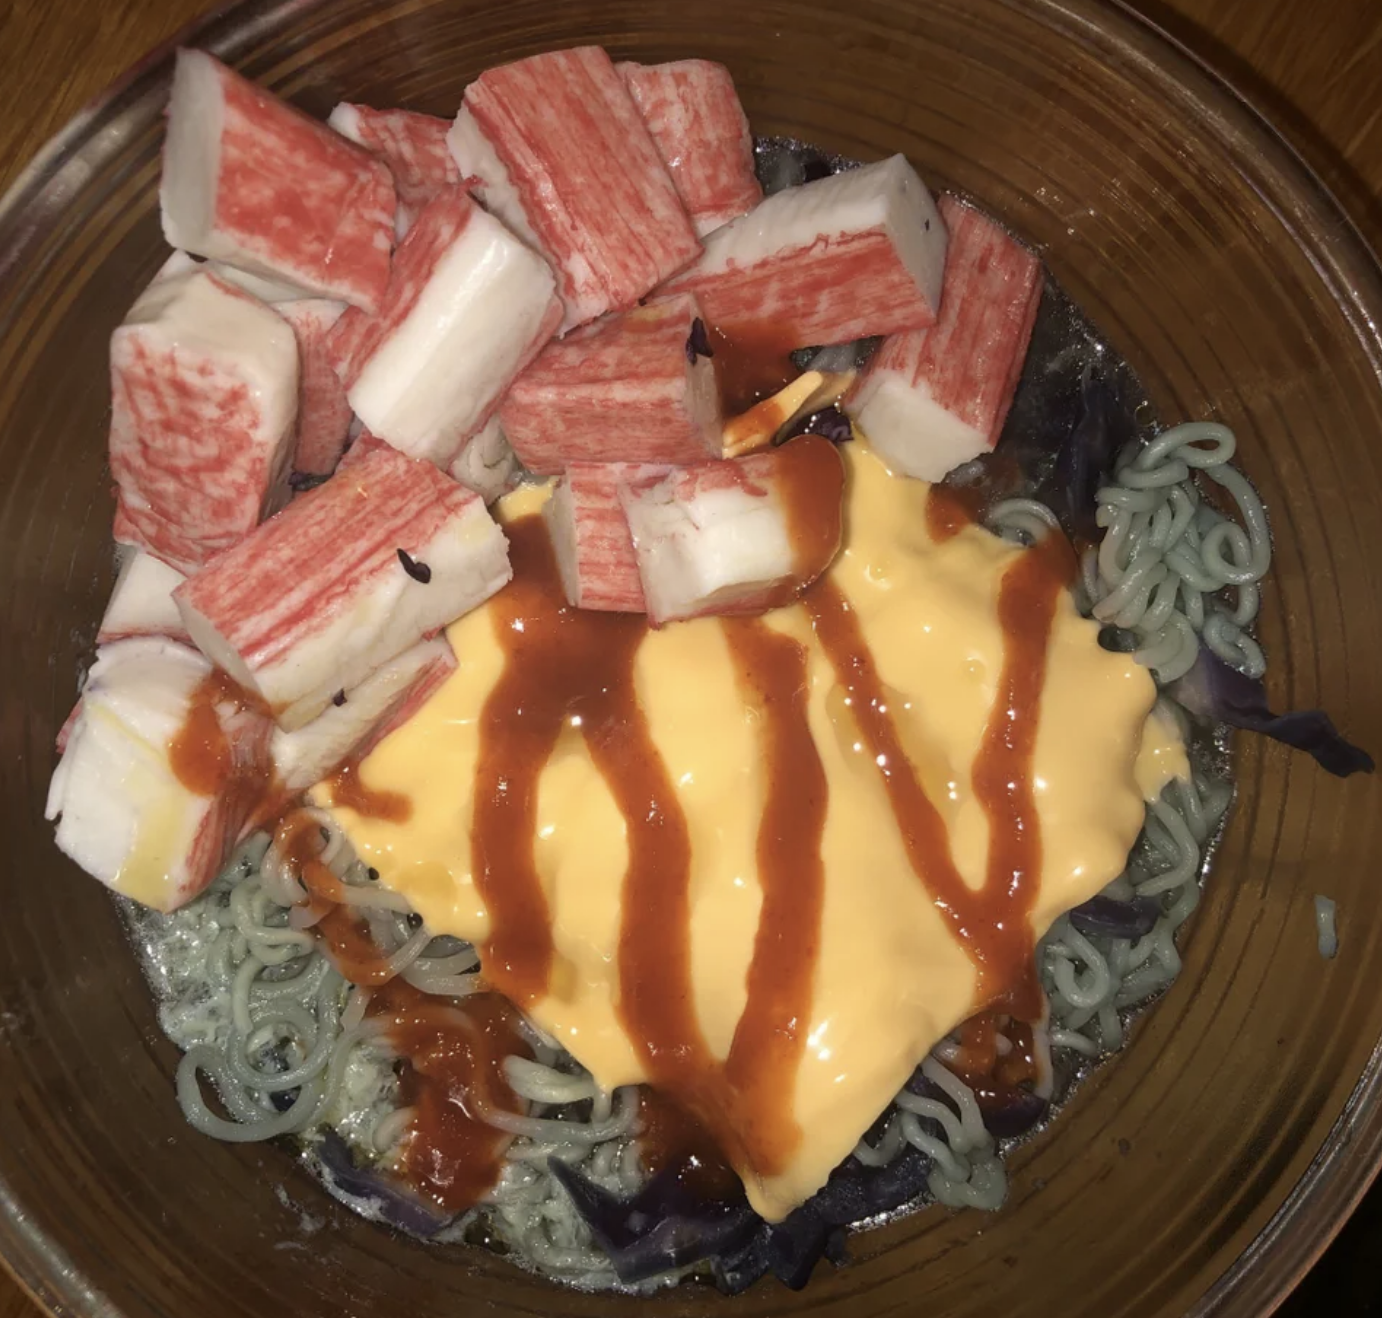 ramen with American cheese, pieces of unidentifiable meat, and a red sauce on top